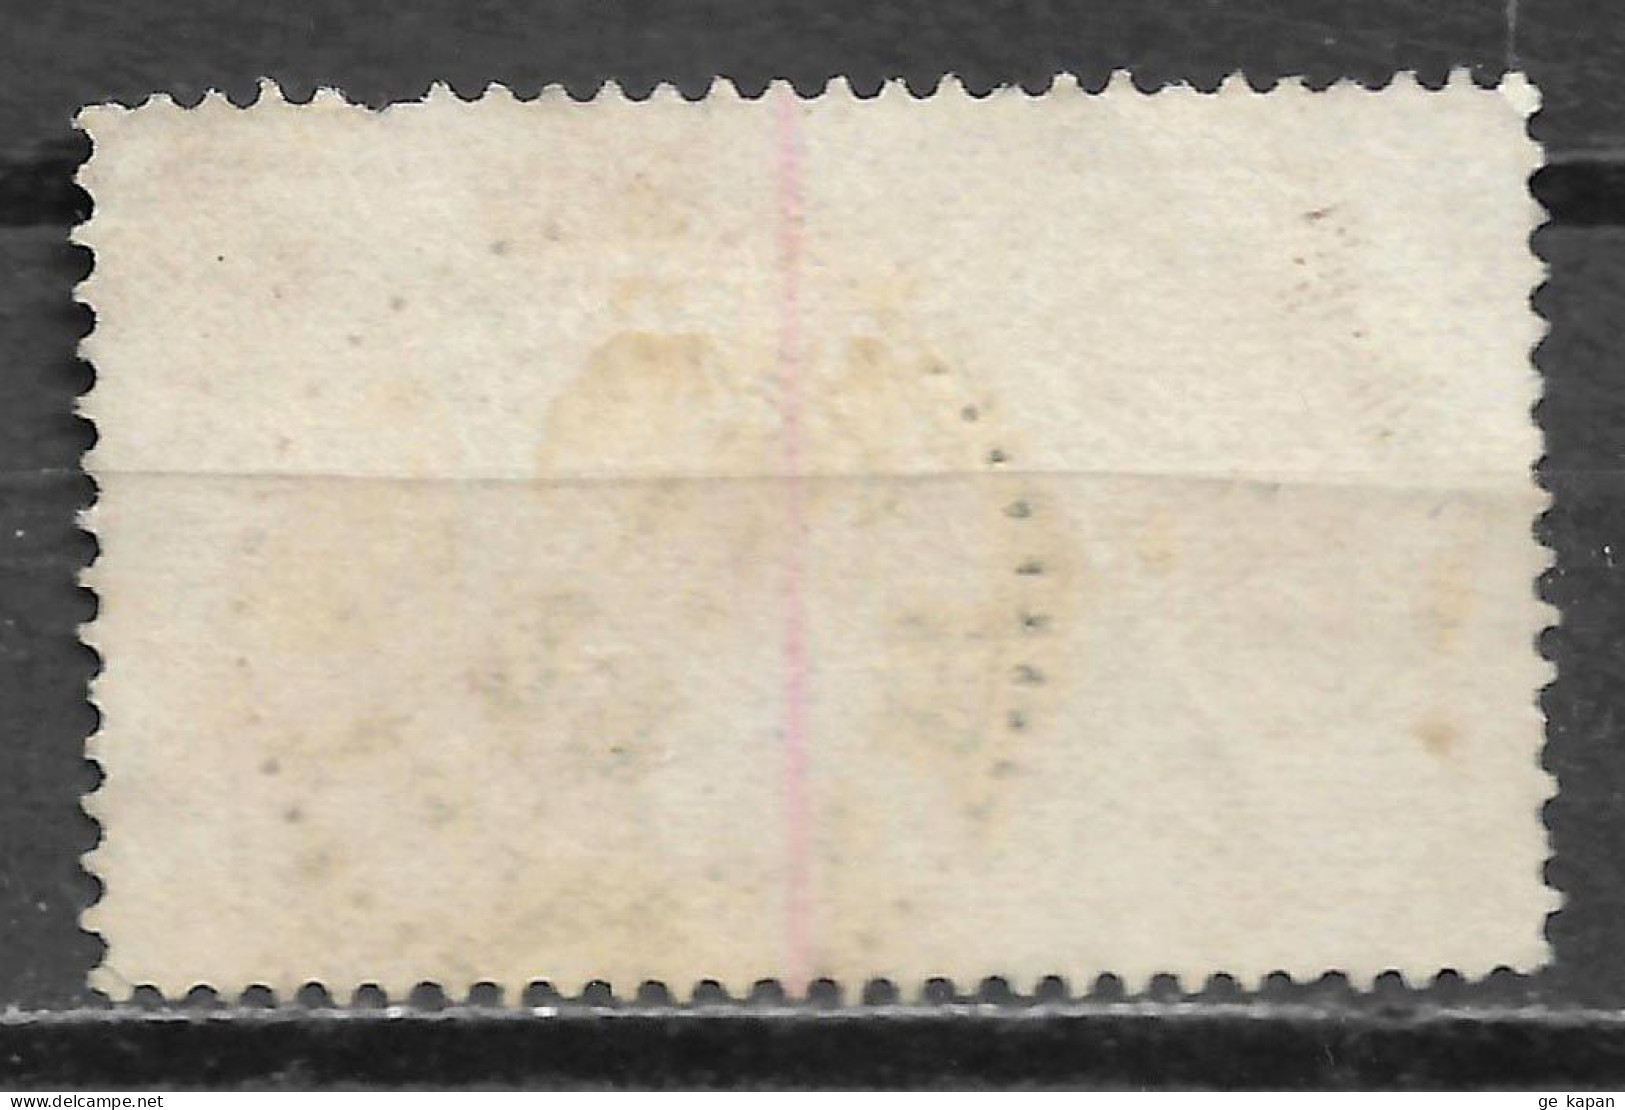 1881 SWEDEN Official USED STAMP Perf.13 (Scott # O21a) CV $22.50 - Officials